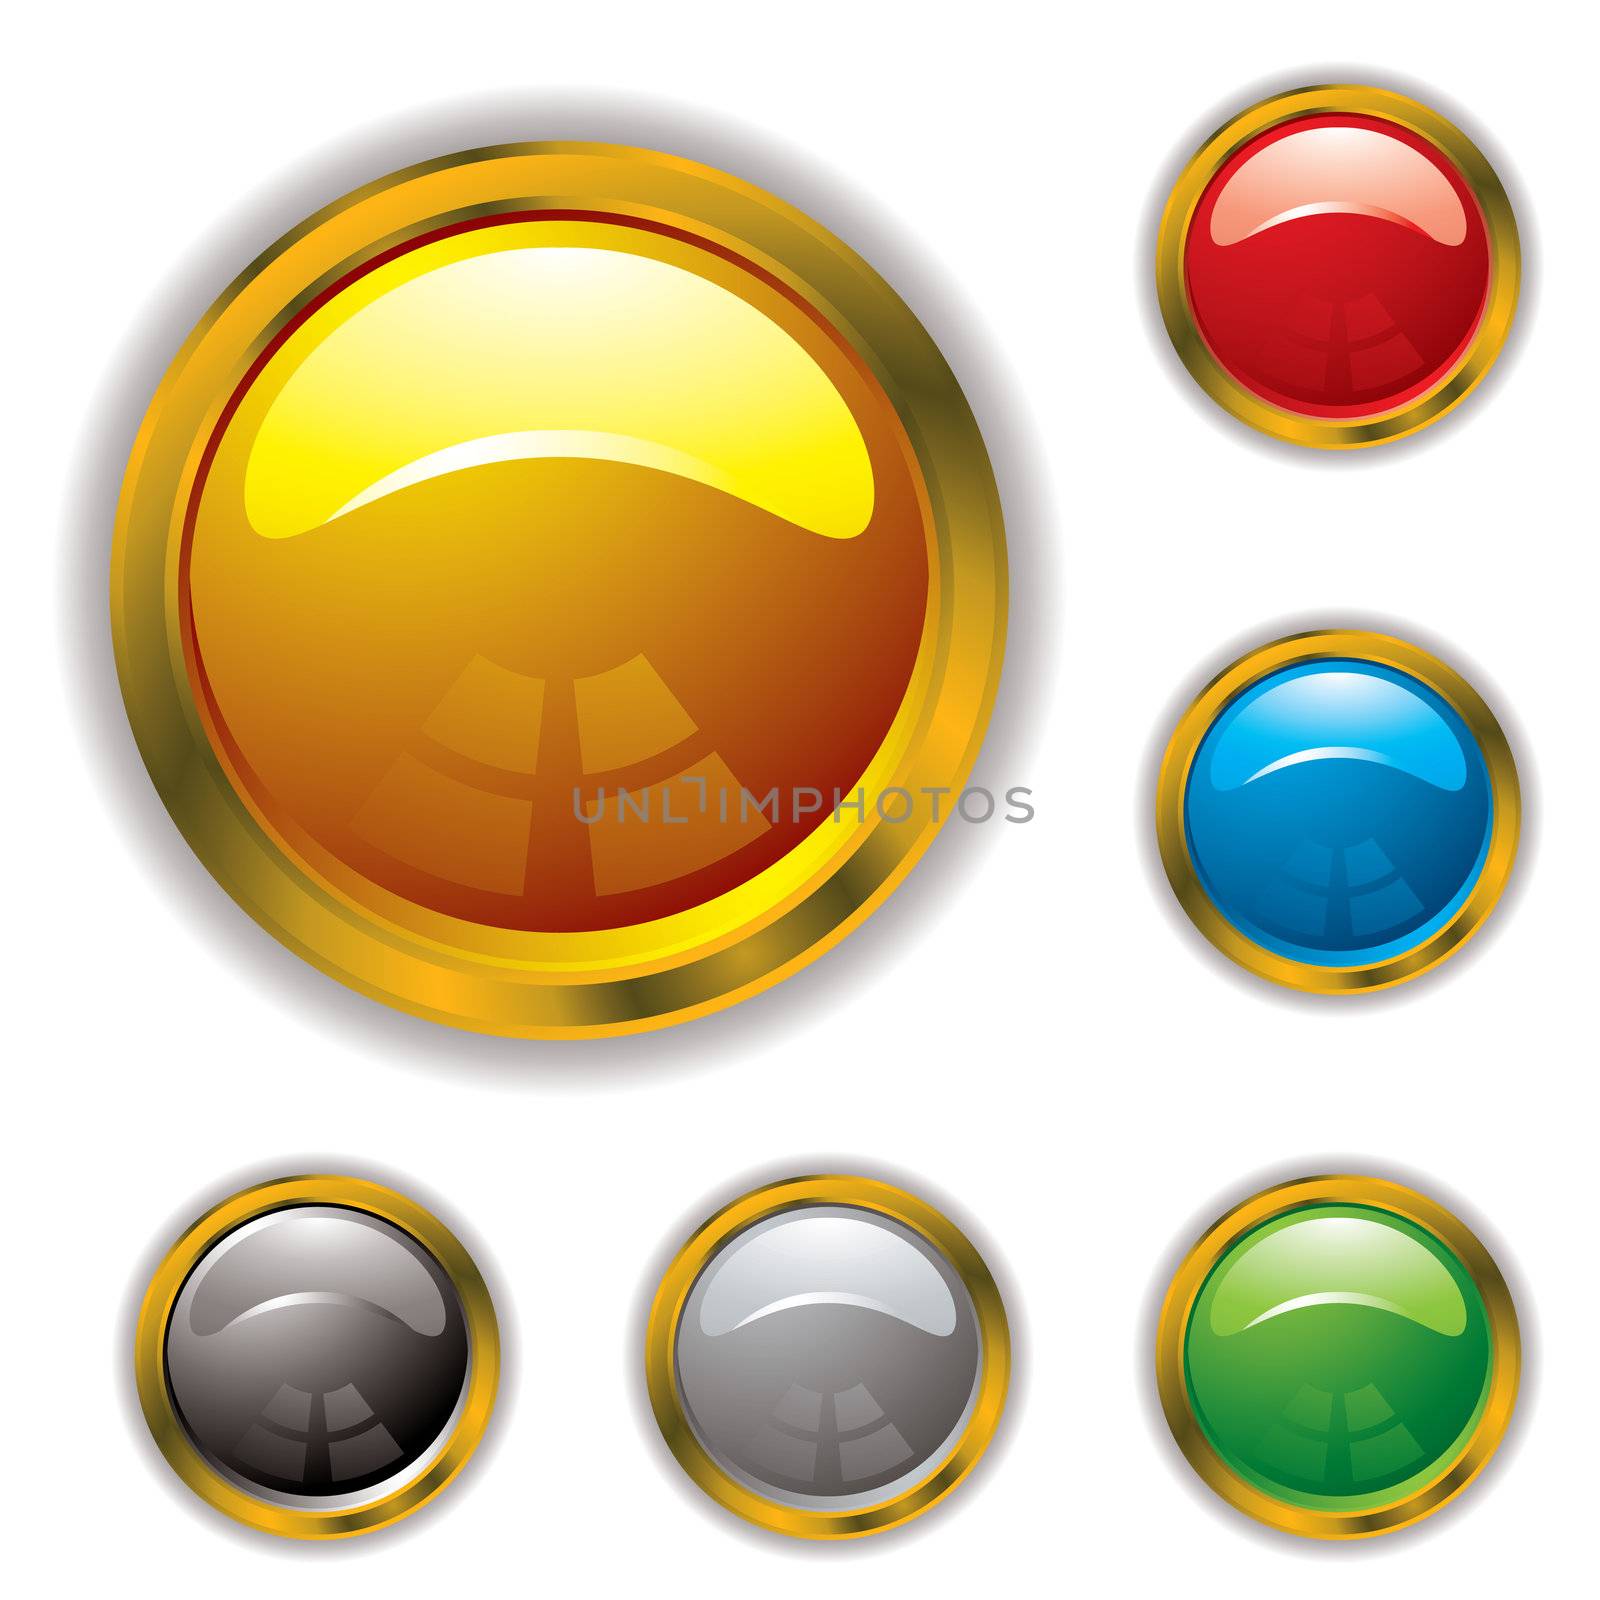 Circular gel filled icons with gold bevel and drop shadow